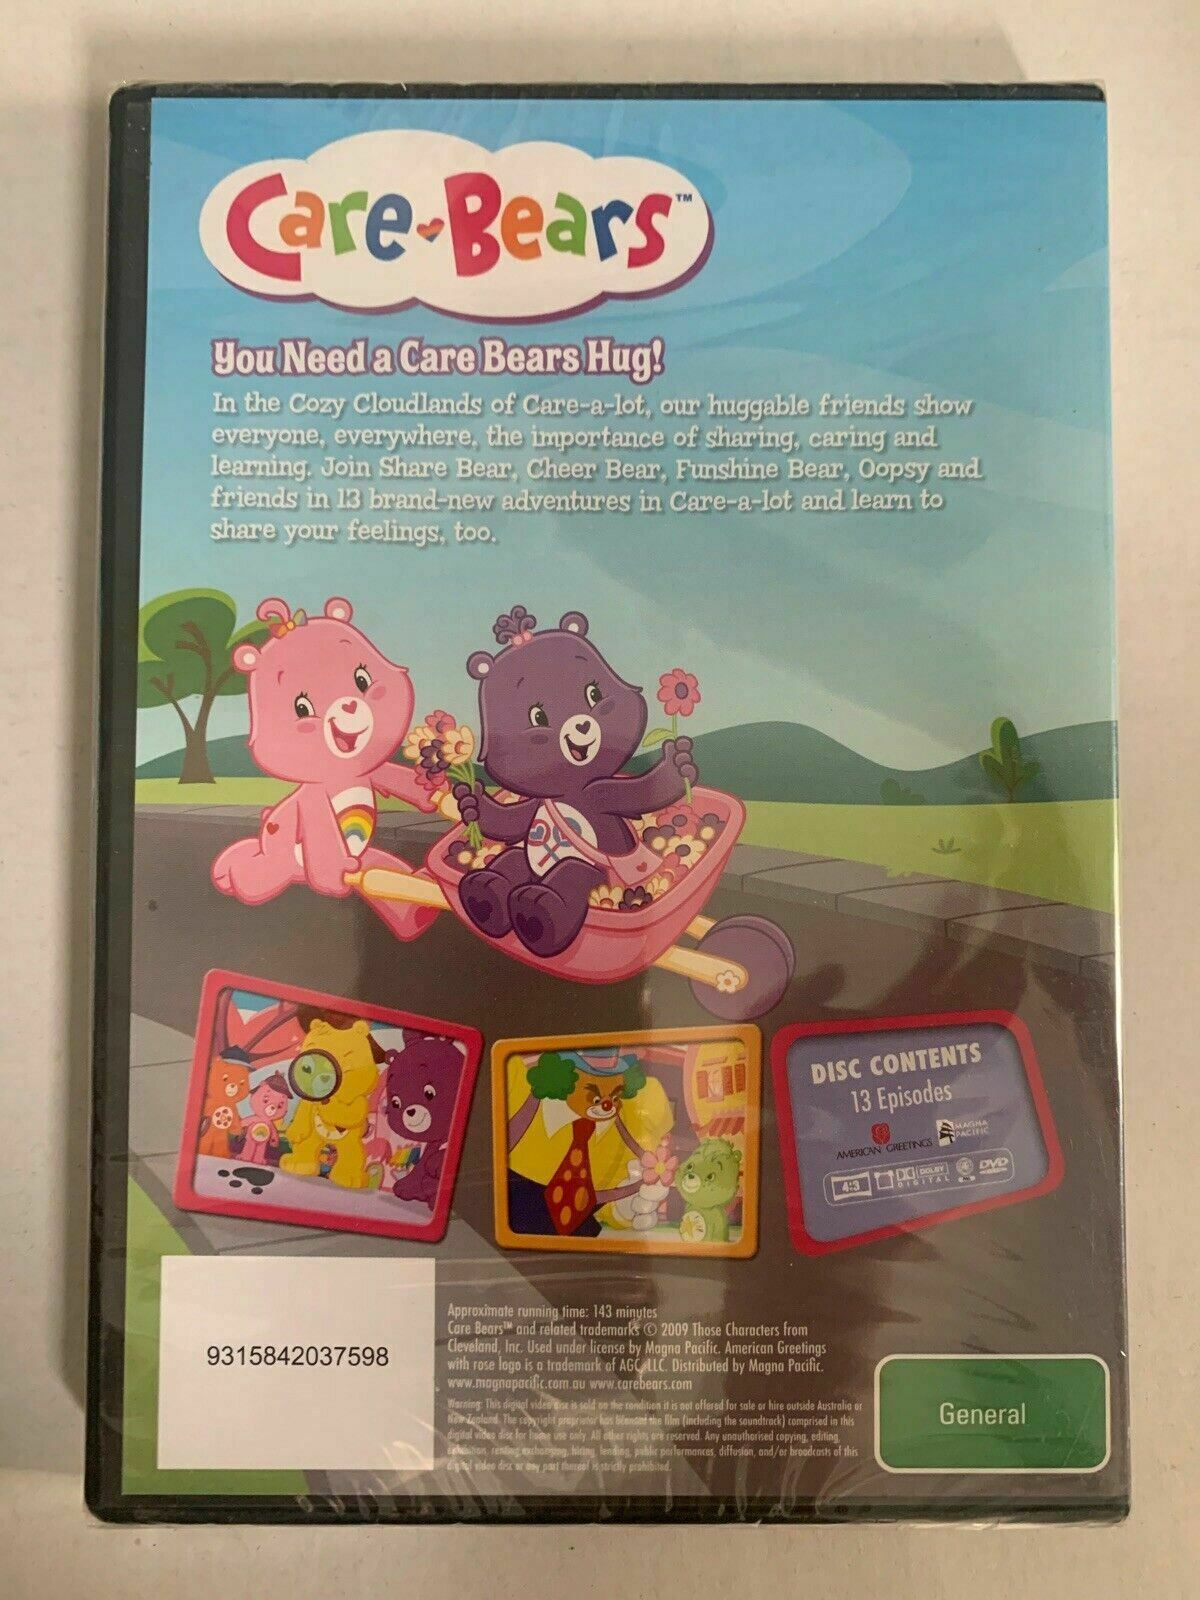 *New Sealed* Care Bears - Adventures in Care-A-Lot & The Last Laugh (DVD,2-Disc)